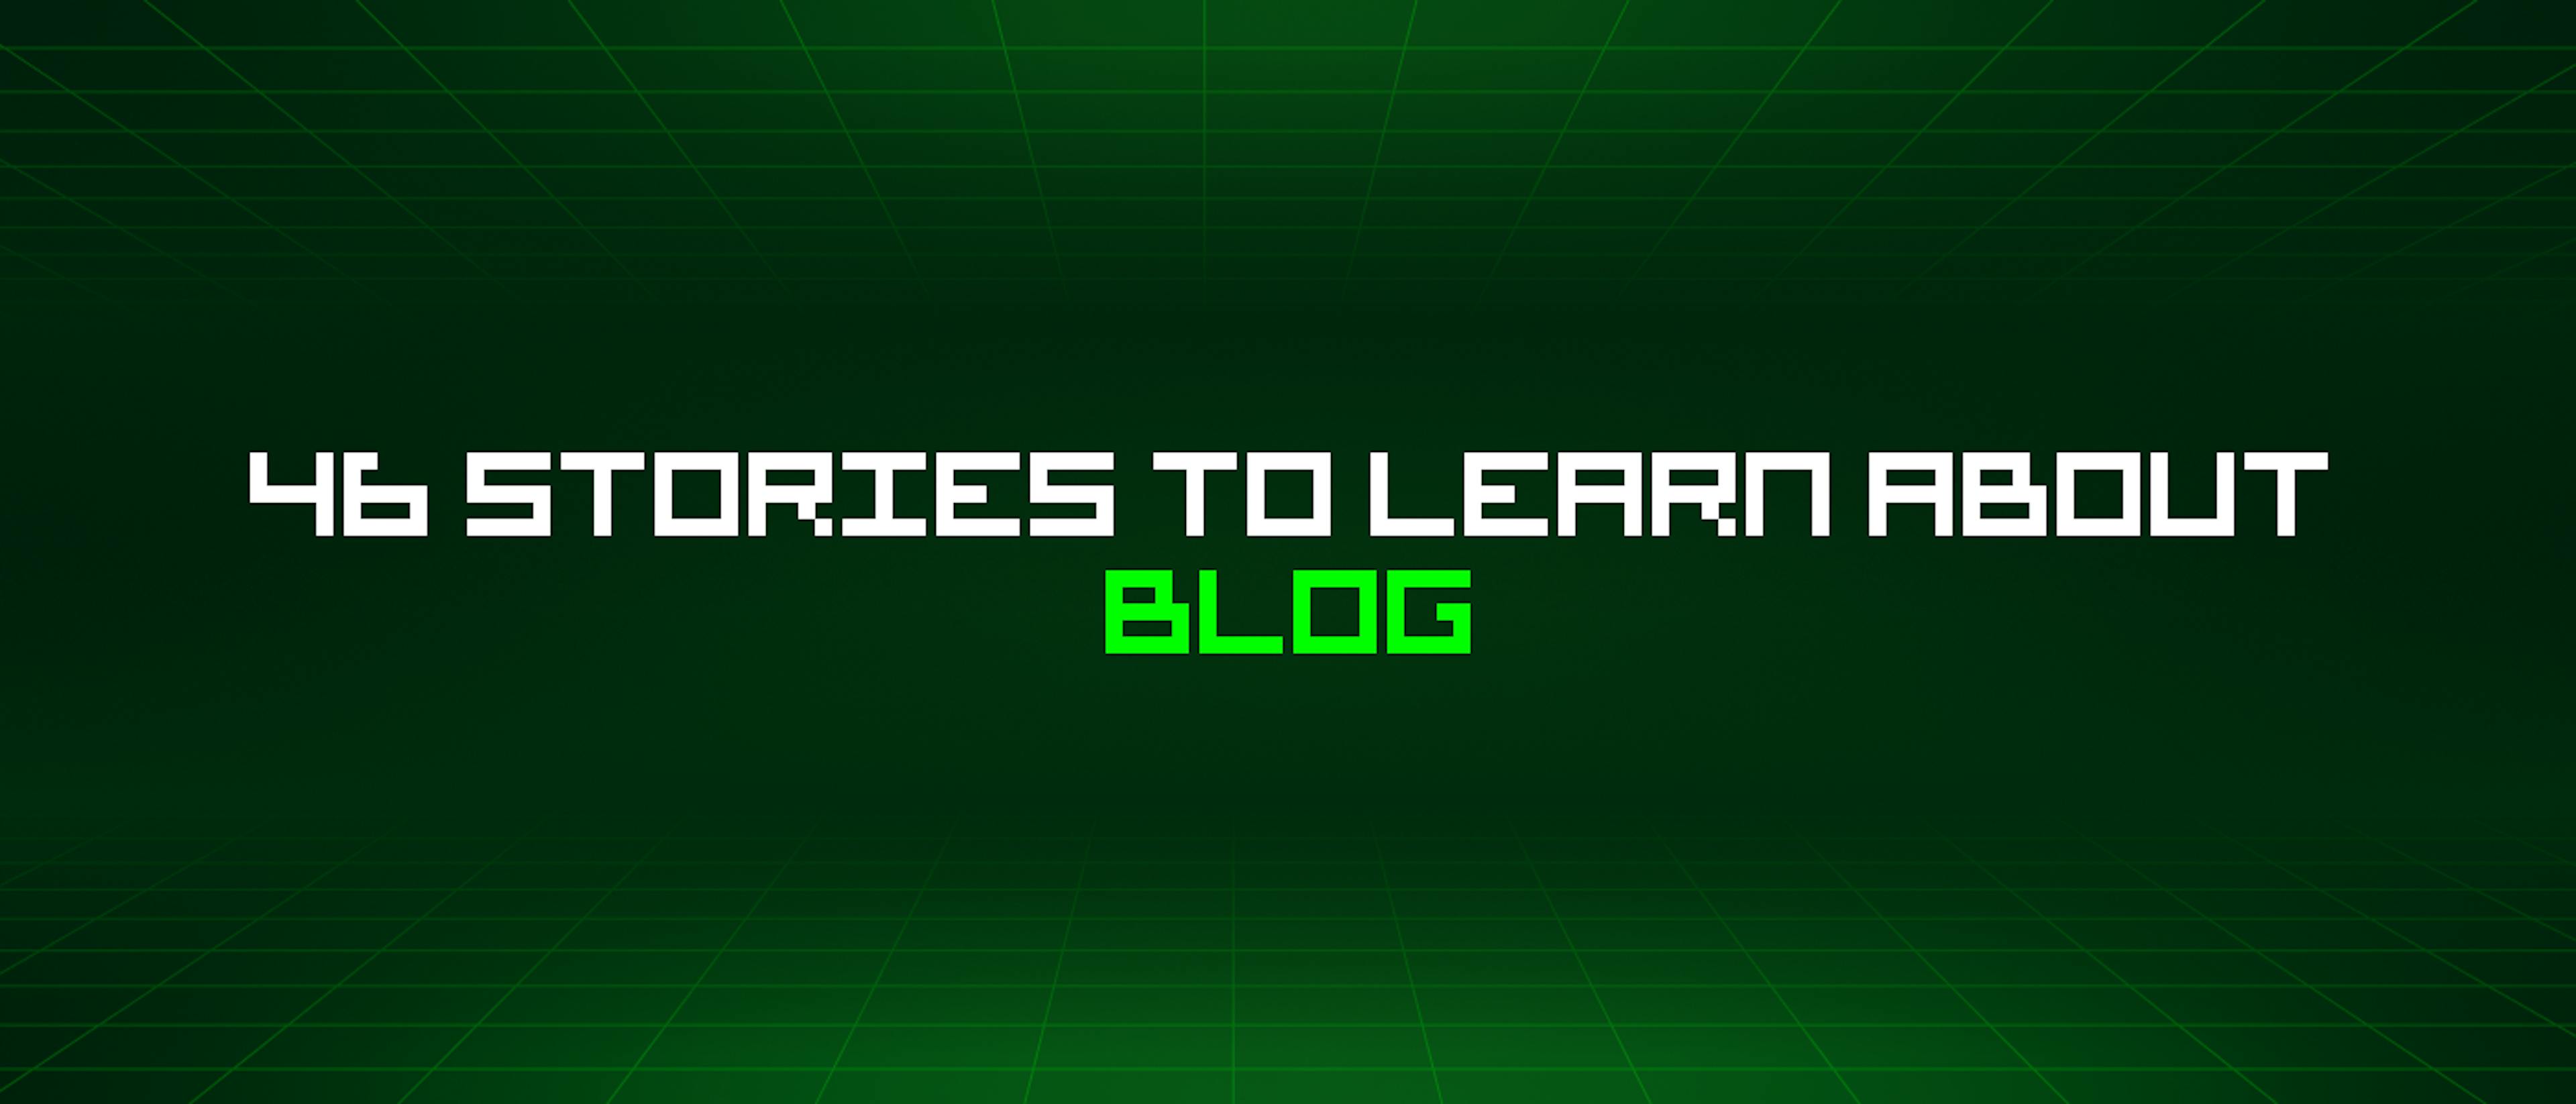 featured image - 46 Stories To Learn About Blog